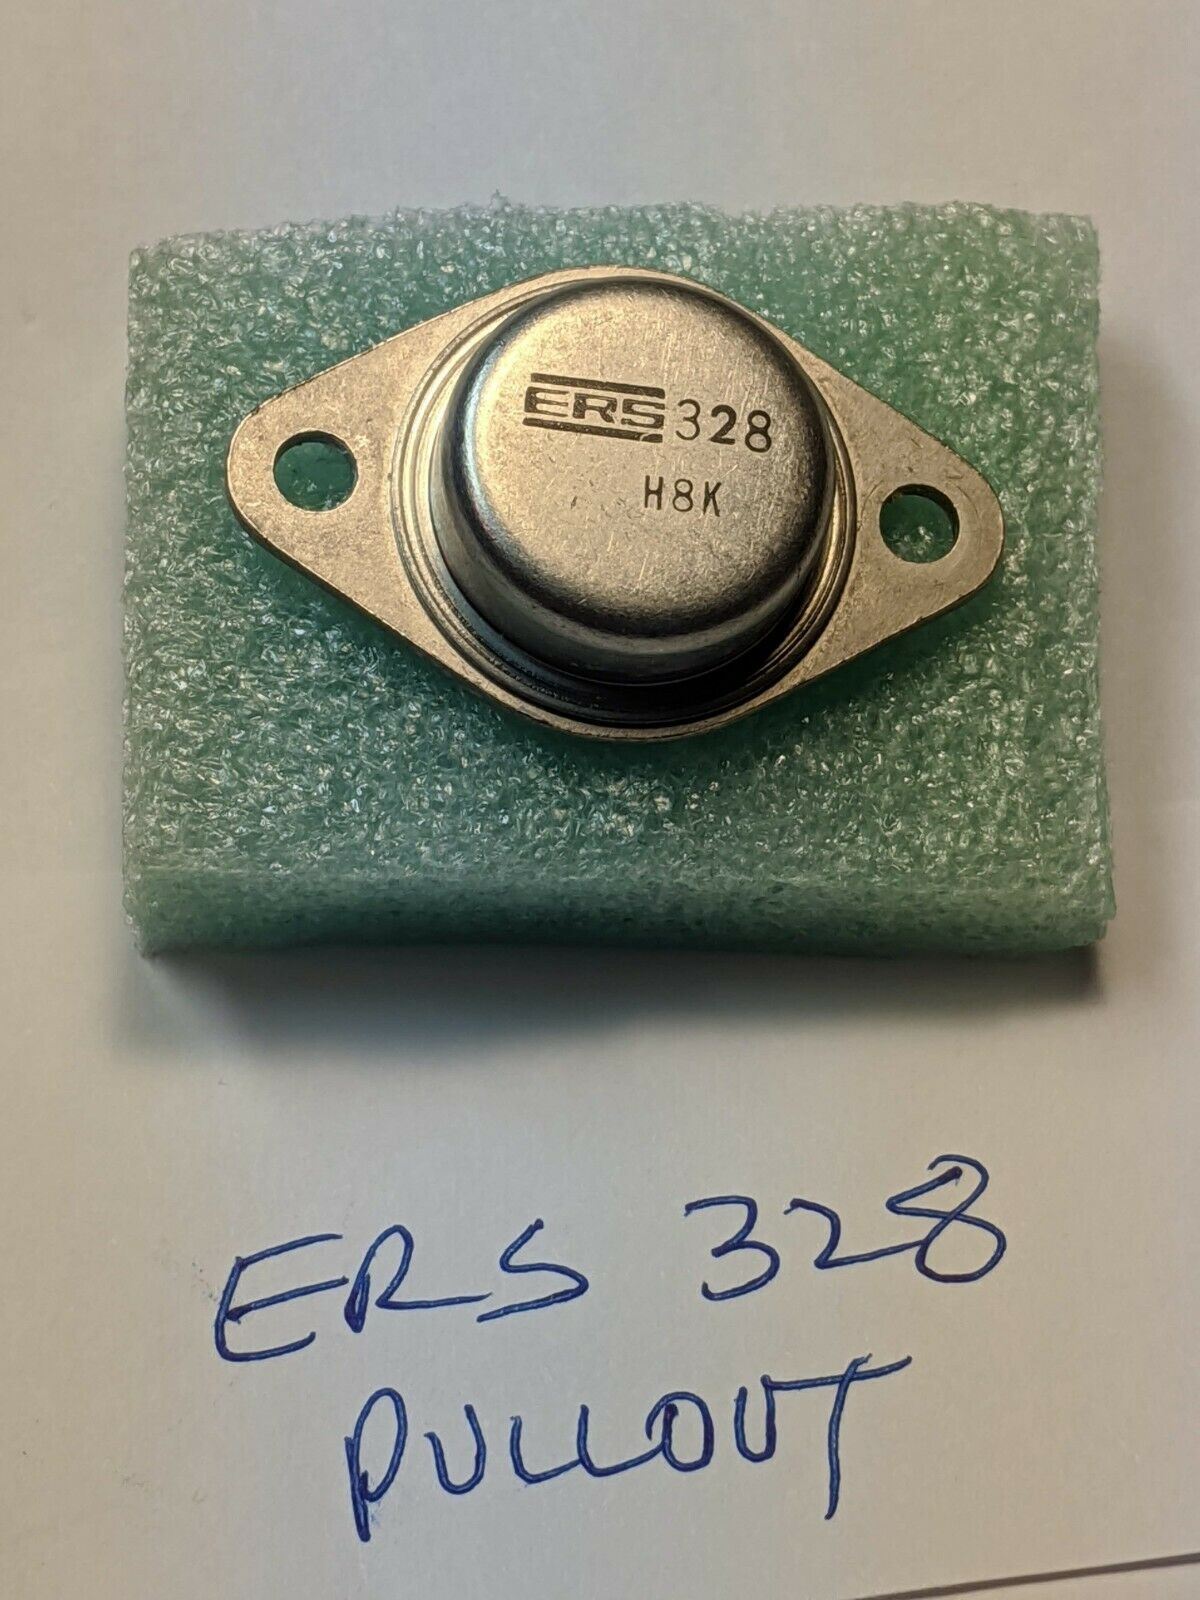 ERS328 Transistor, Good Pullout